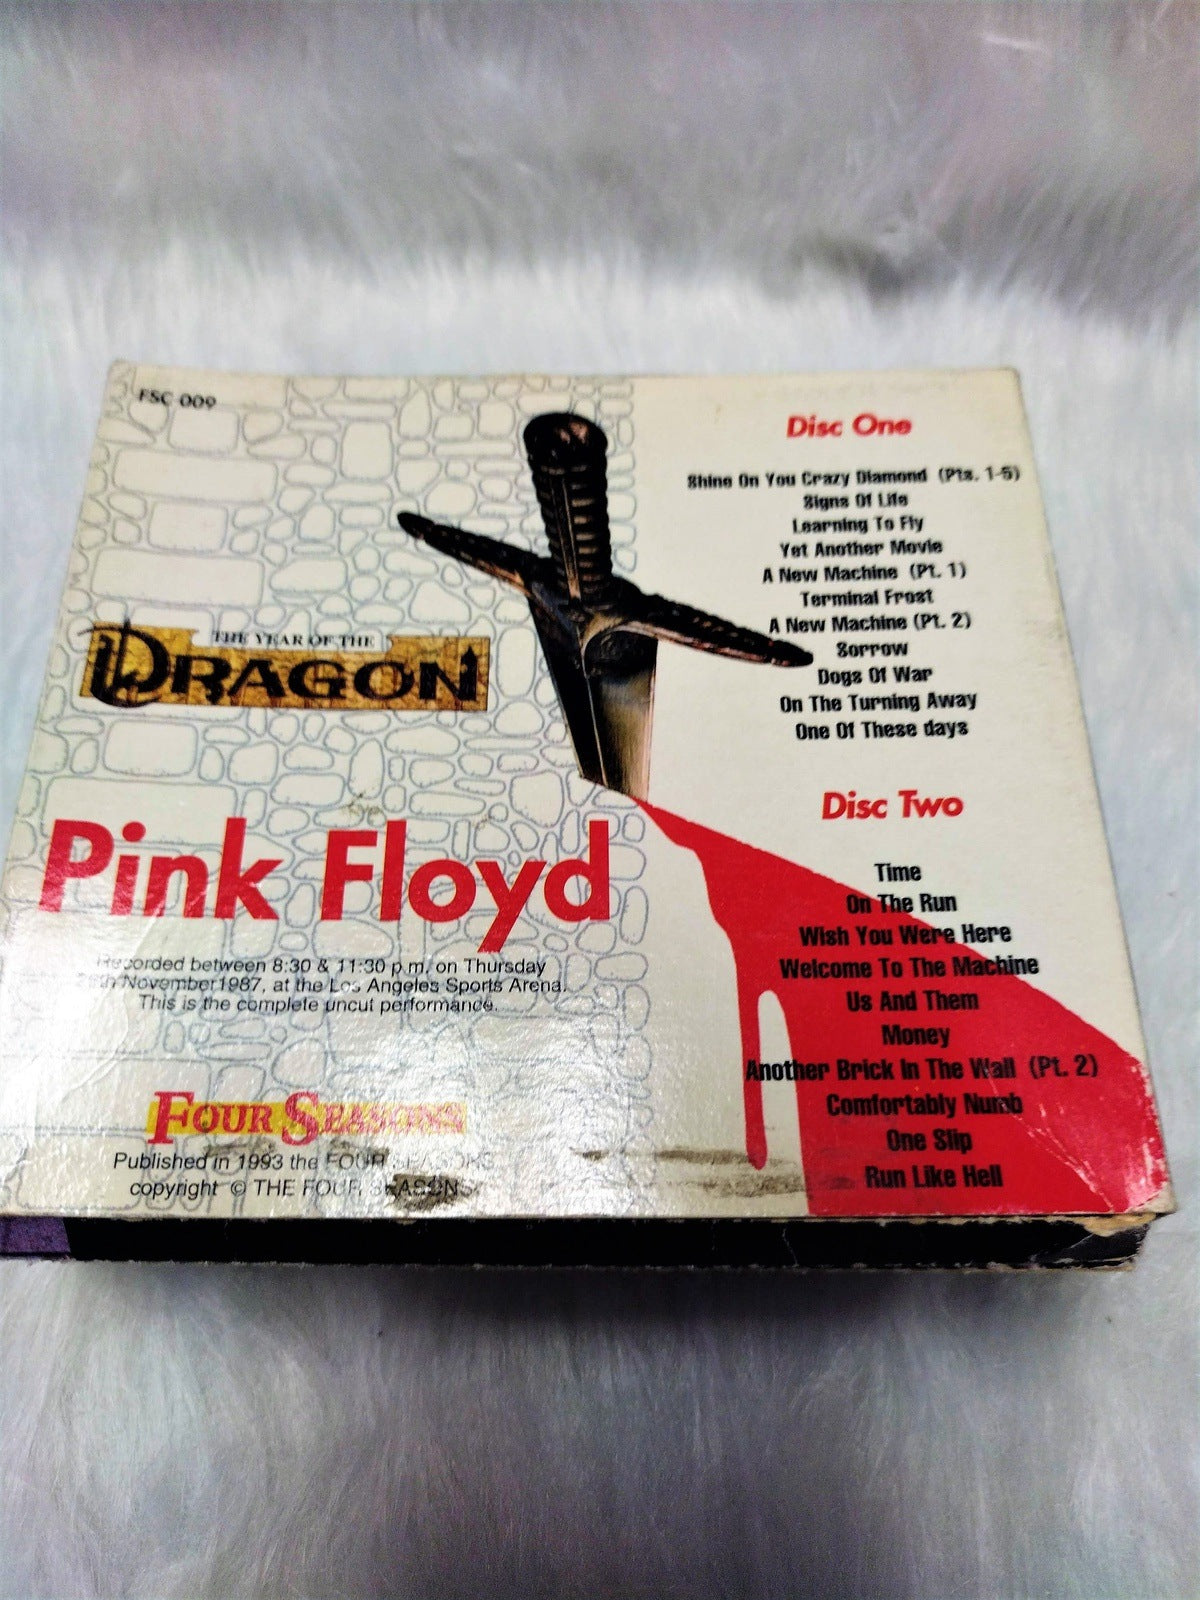 Pink Floyd "The Year of the Dragon" 2 CD Box Set